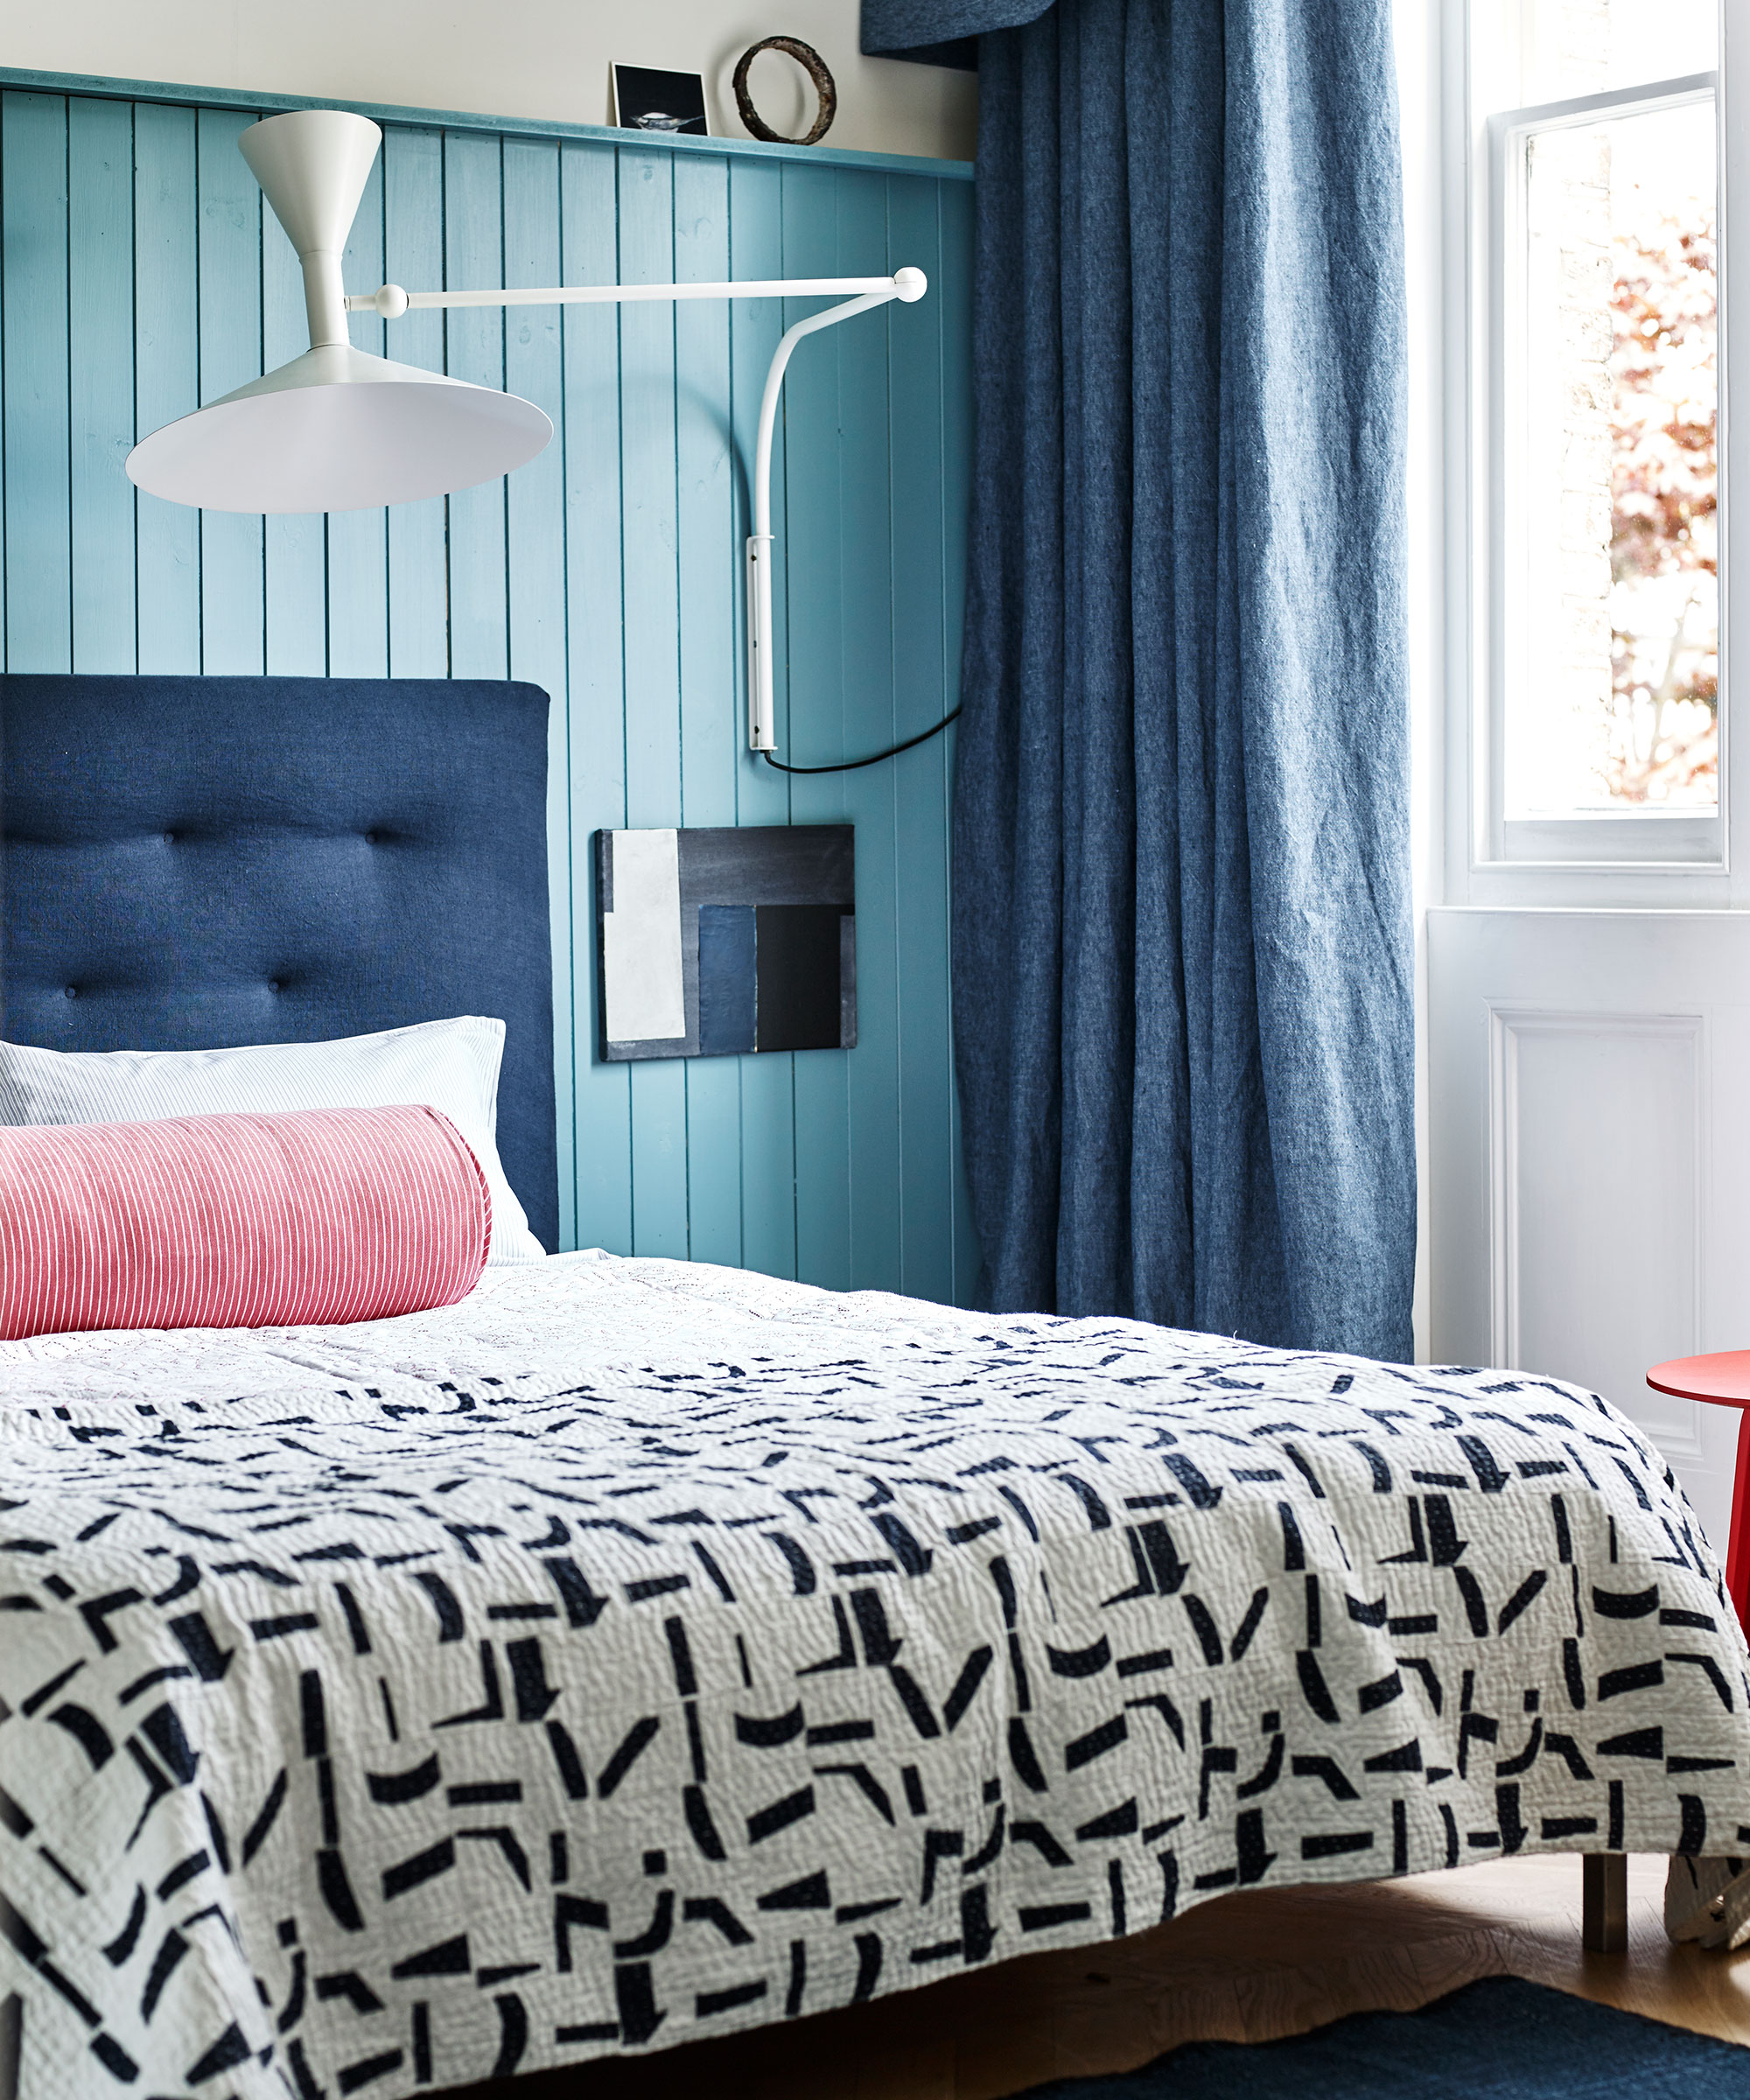 An example of guest room ideas showing a blue paneled wall behind a bed with a navy blue headboard and a monochrome throw